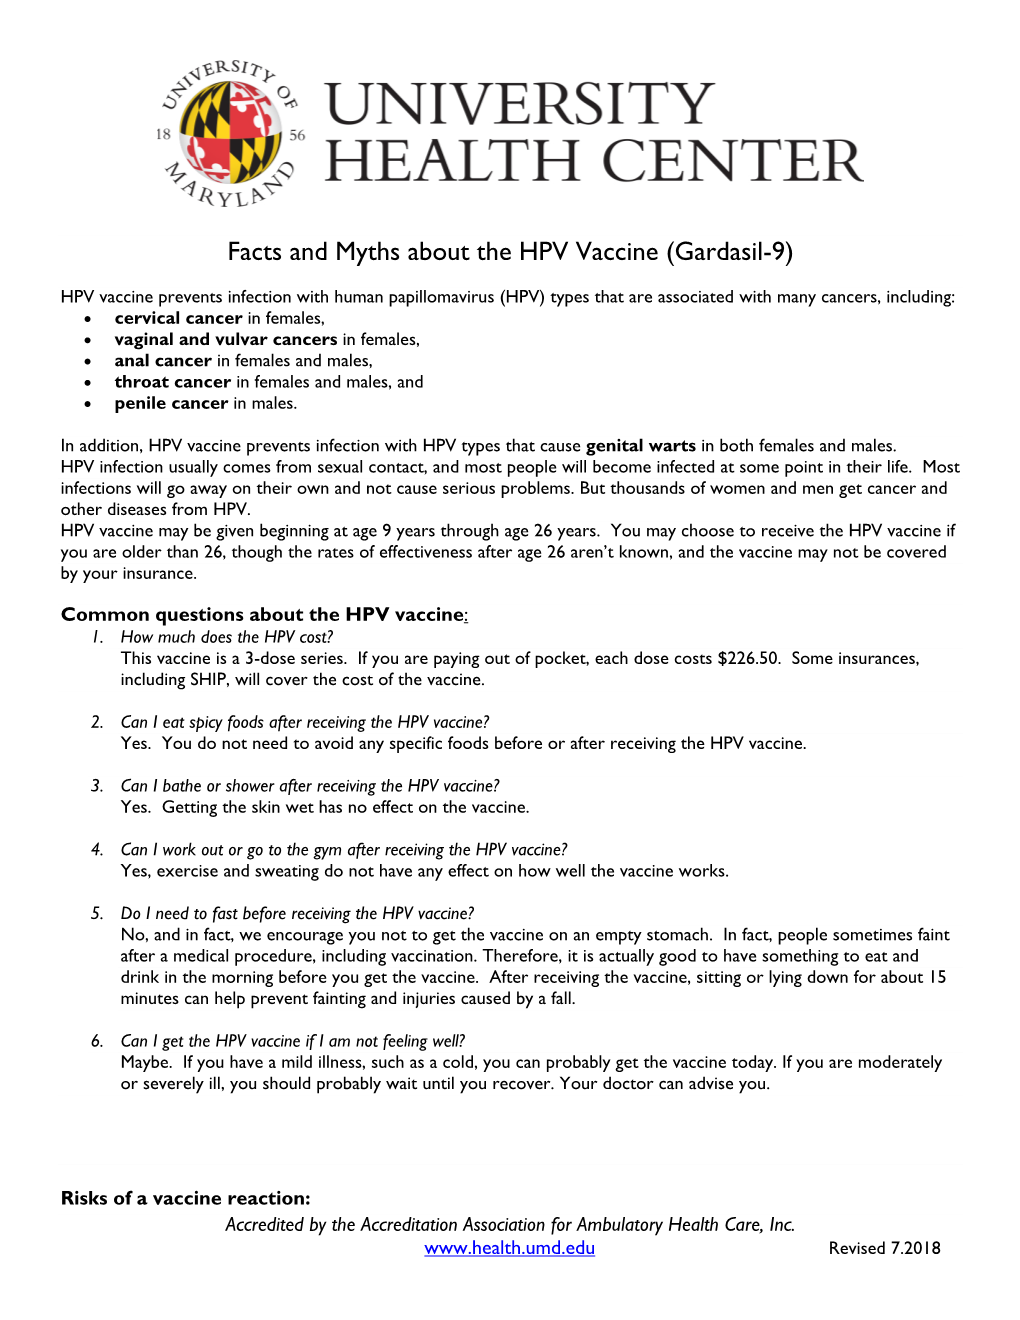 Facts and Myths About the HPV Vaccine (Gardasil-9)